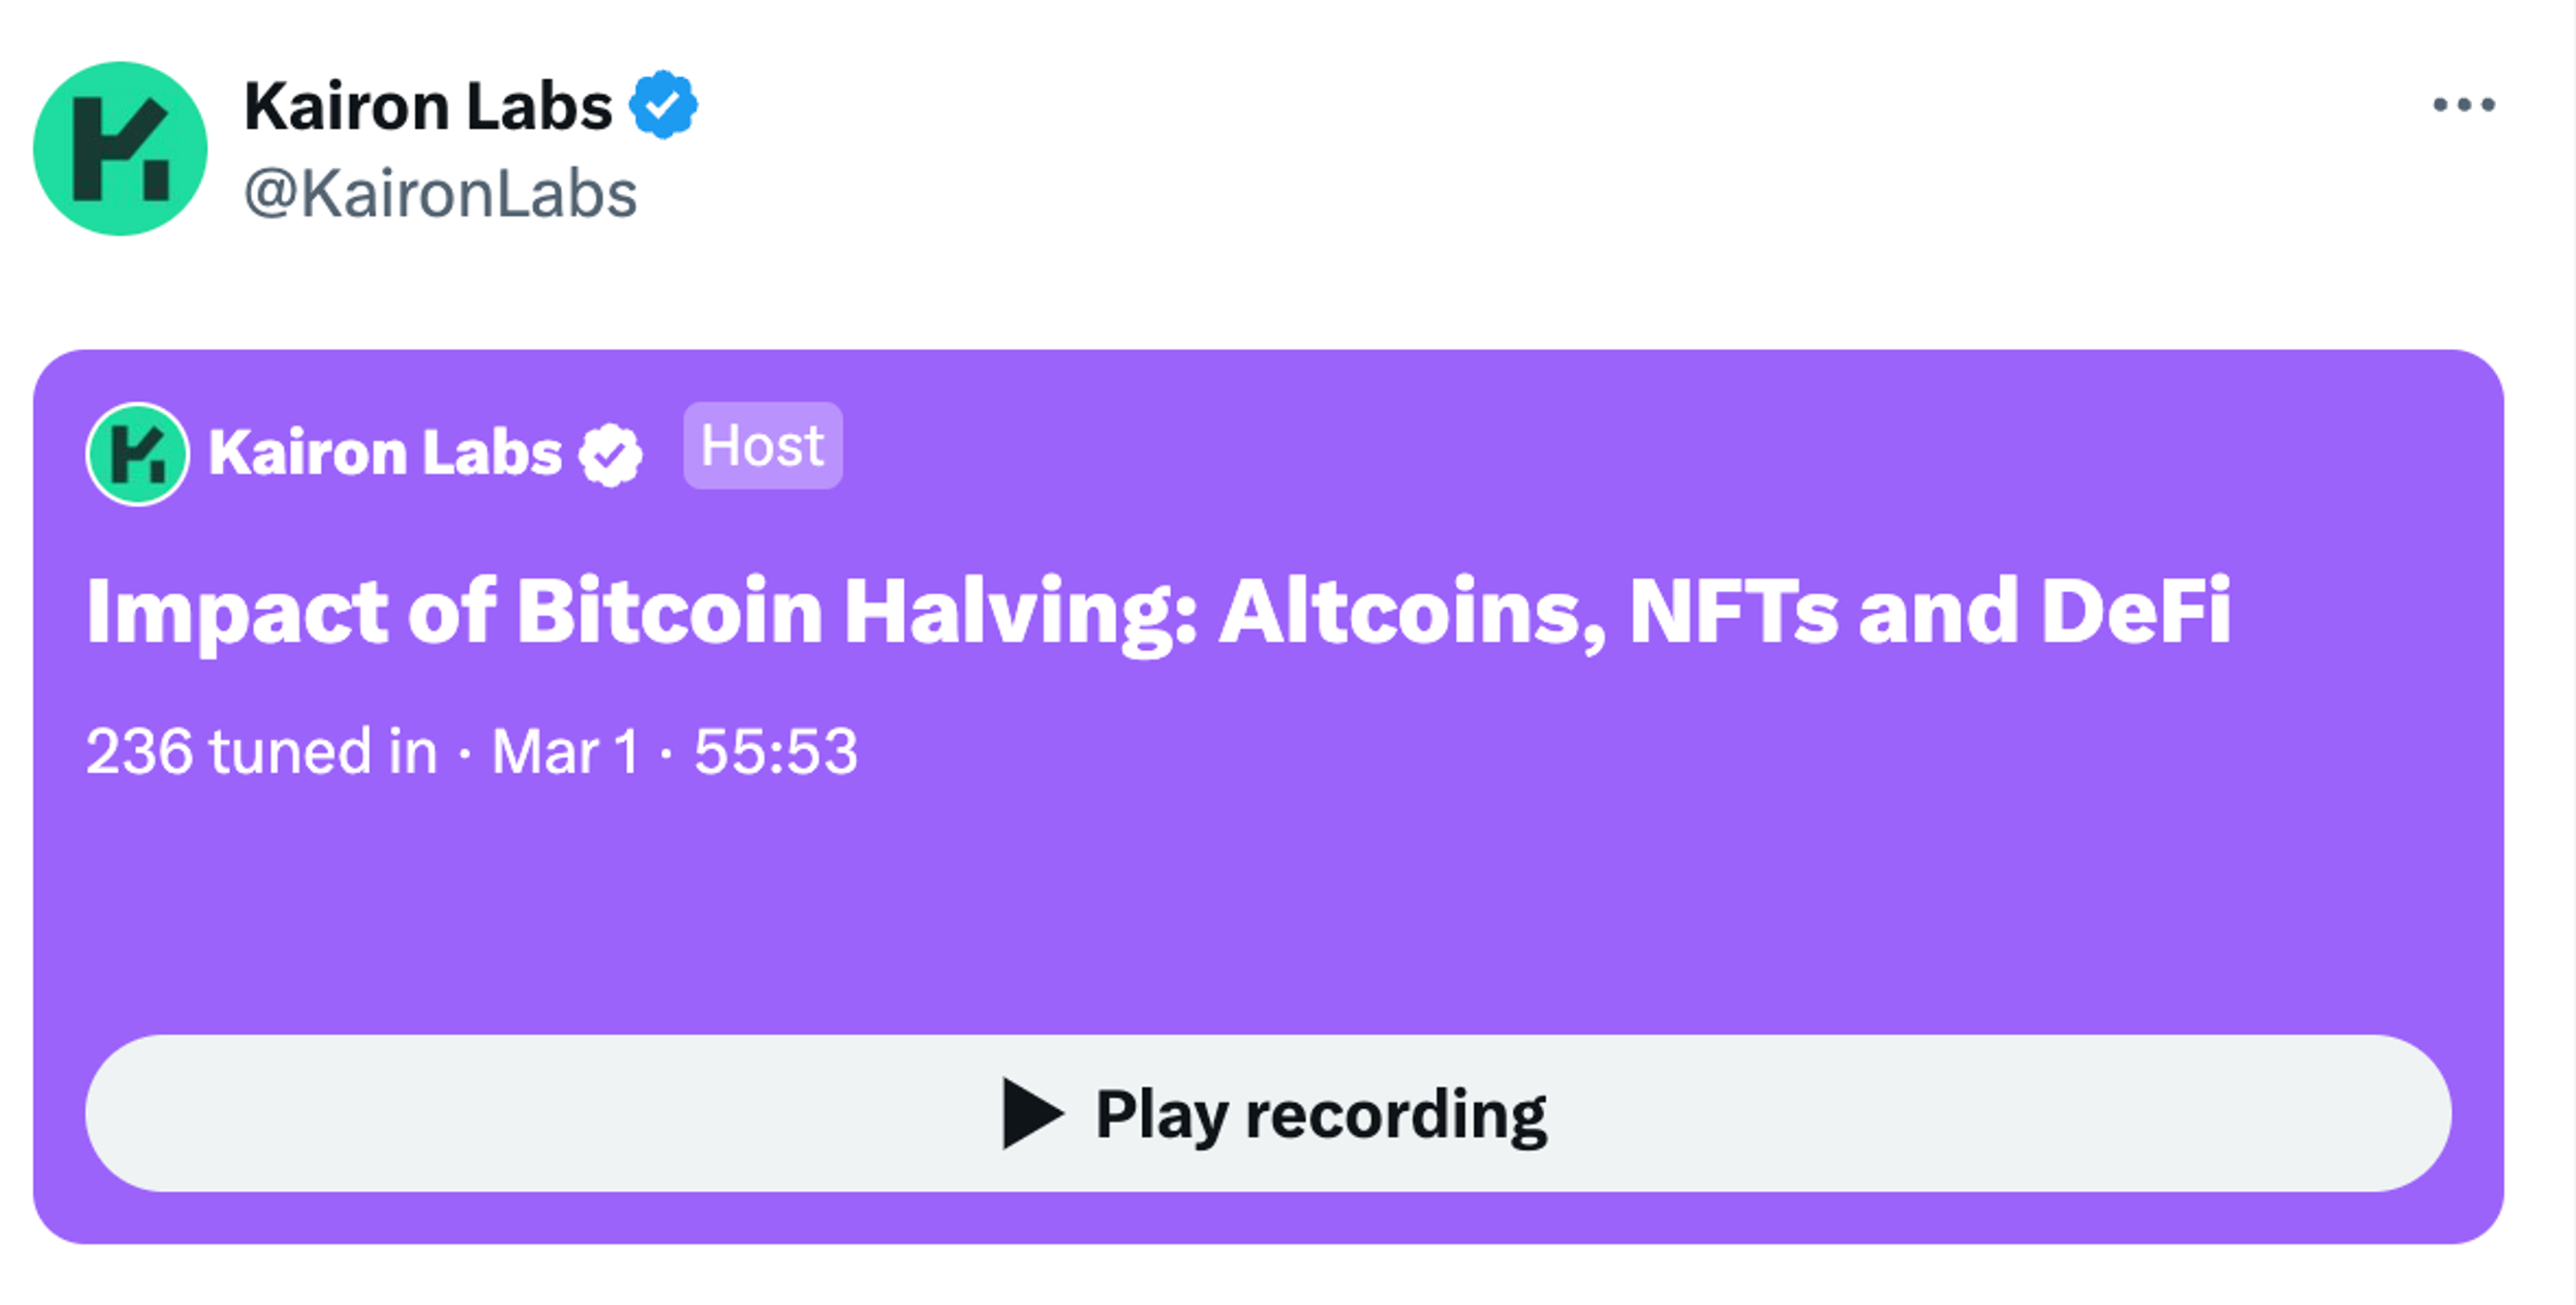 Impact of Bitcoin Halving to Altcoins, NFTs, and DeFi | Kairon Labs